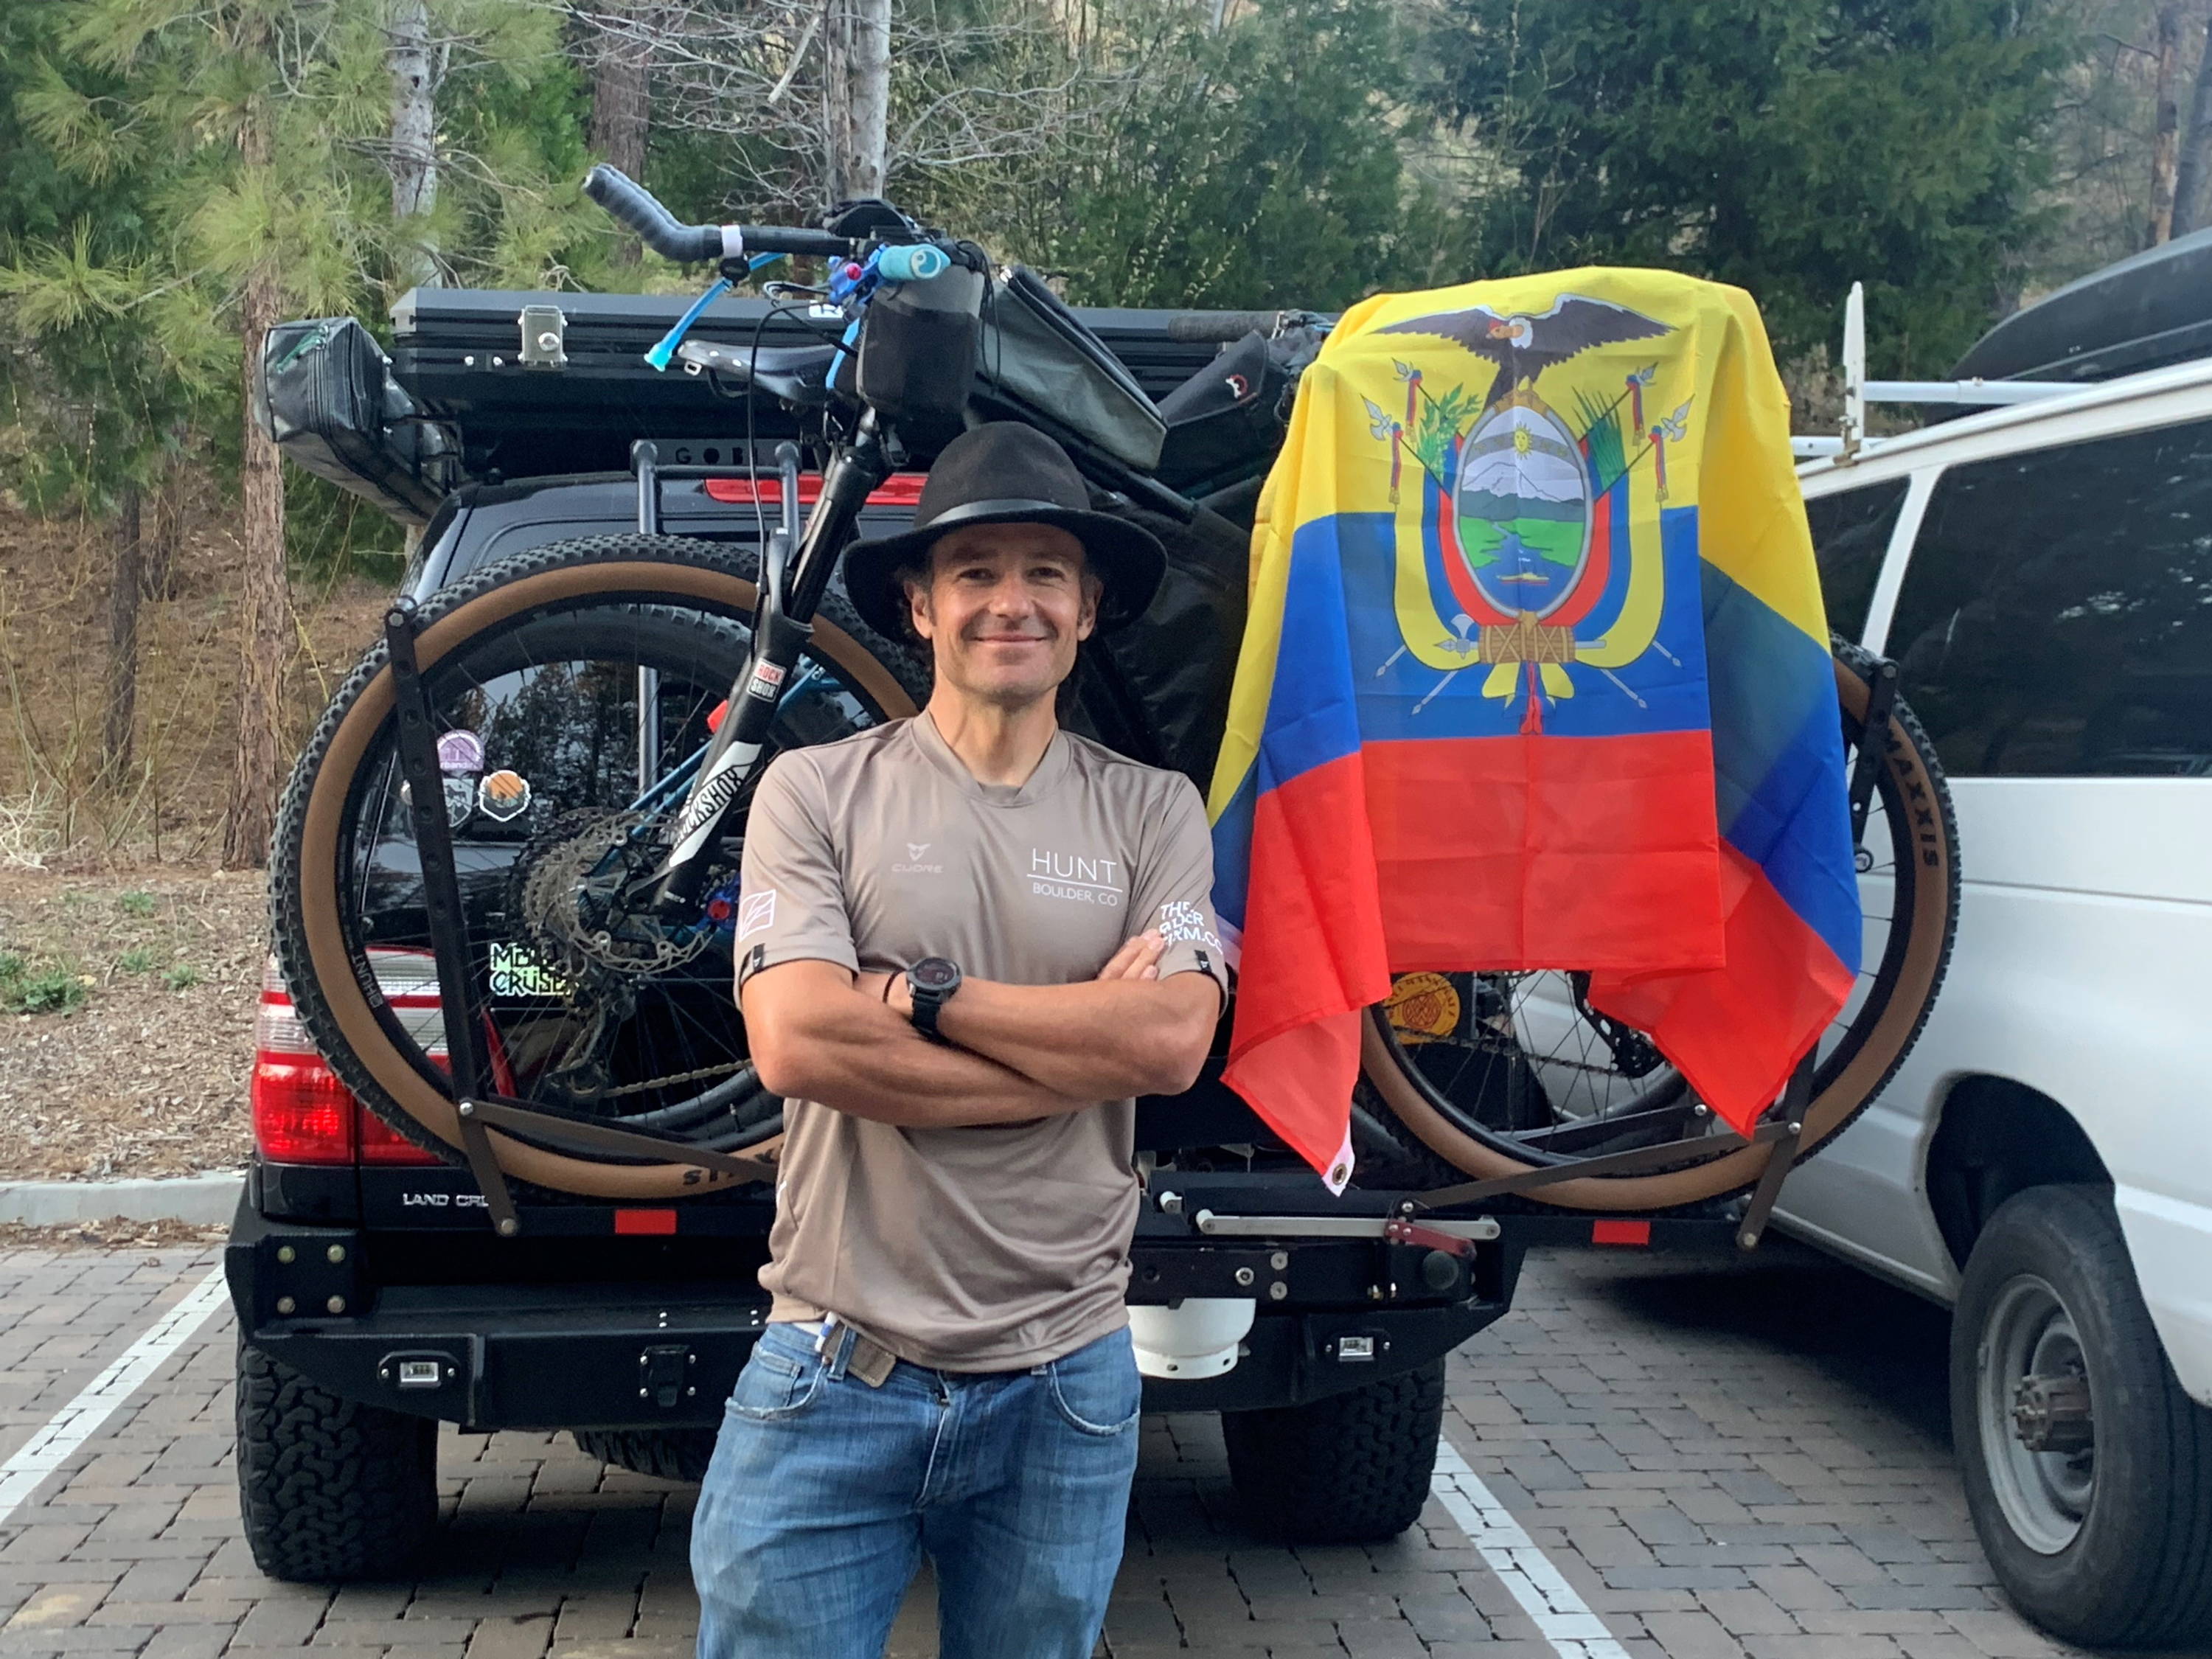 Xavier smiling in front of his bike and Ecuadorian flag